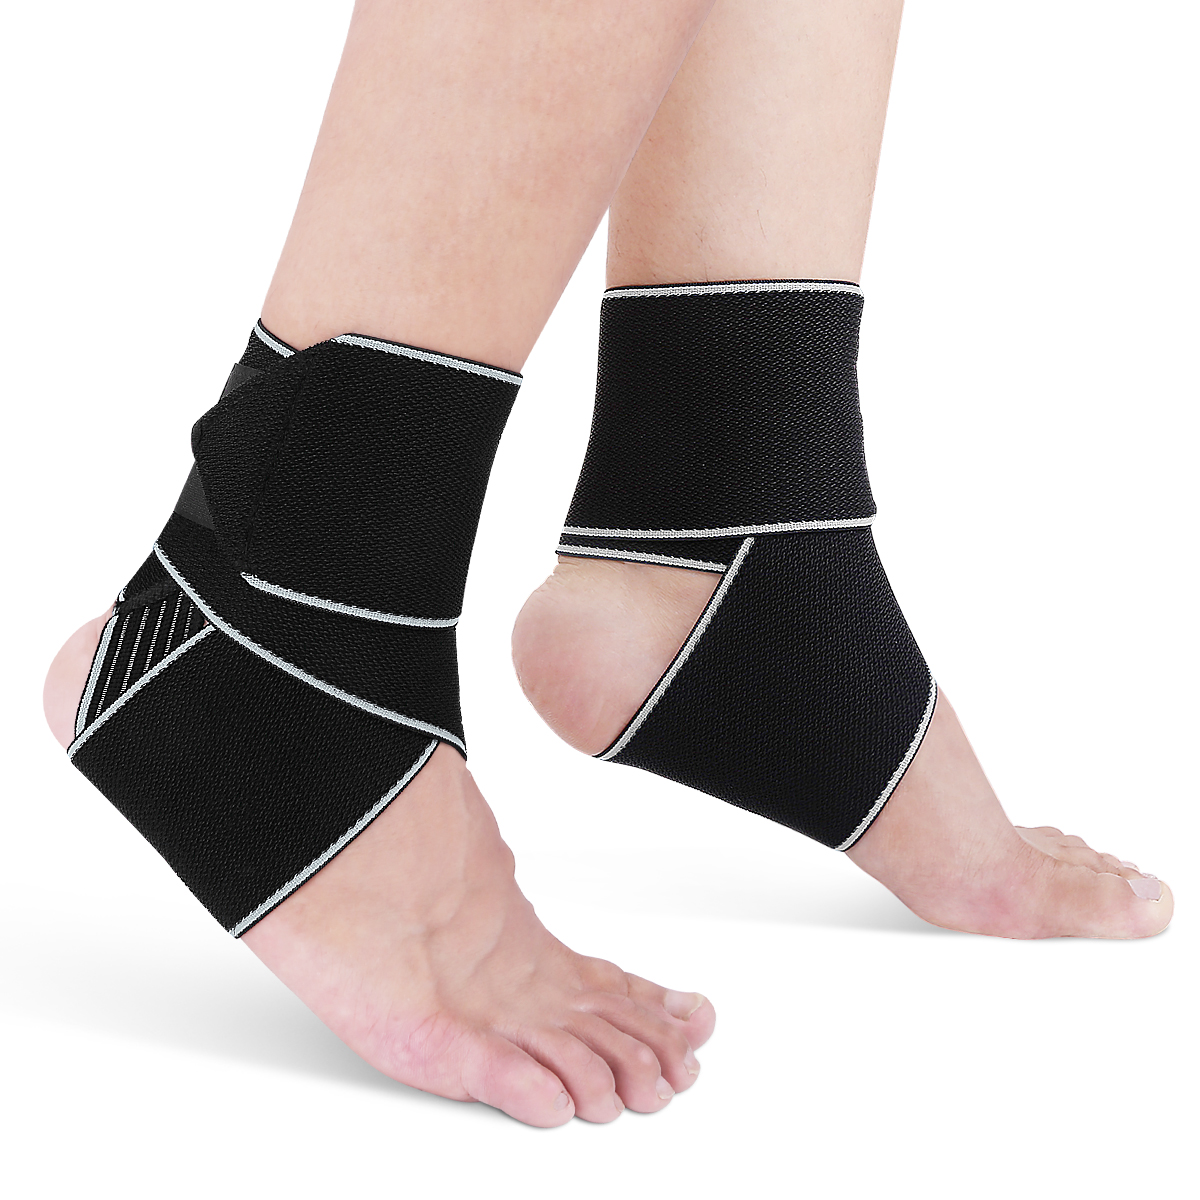 Ankle Support Brace Compression Adjustable, AVIDDA Ankle Brace Wrap Strap for Men Women Arch Support, Foot Care Breathable Ankle Support for Ankle Pain, Plantar Fasciitis, Ankle Sprain Recovery-1 Pair